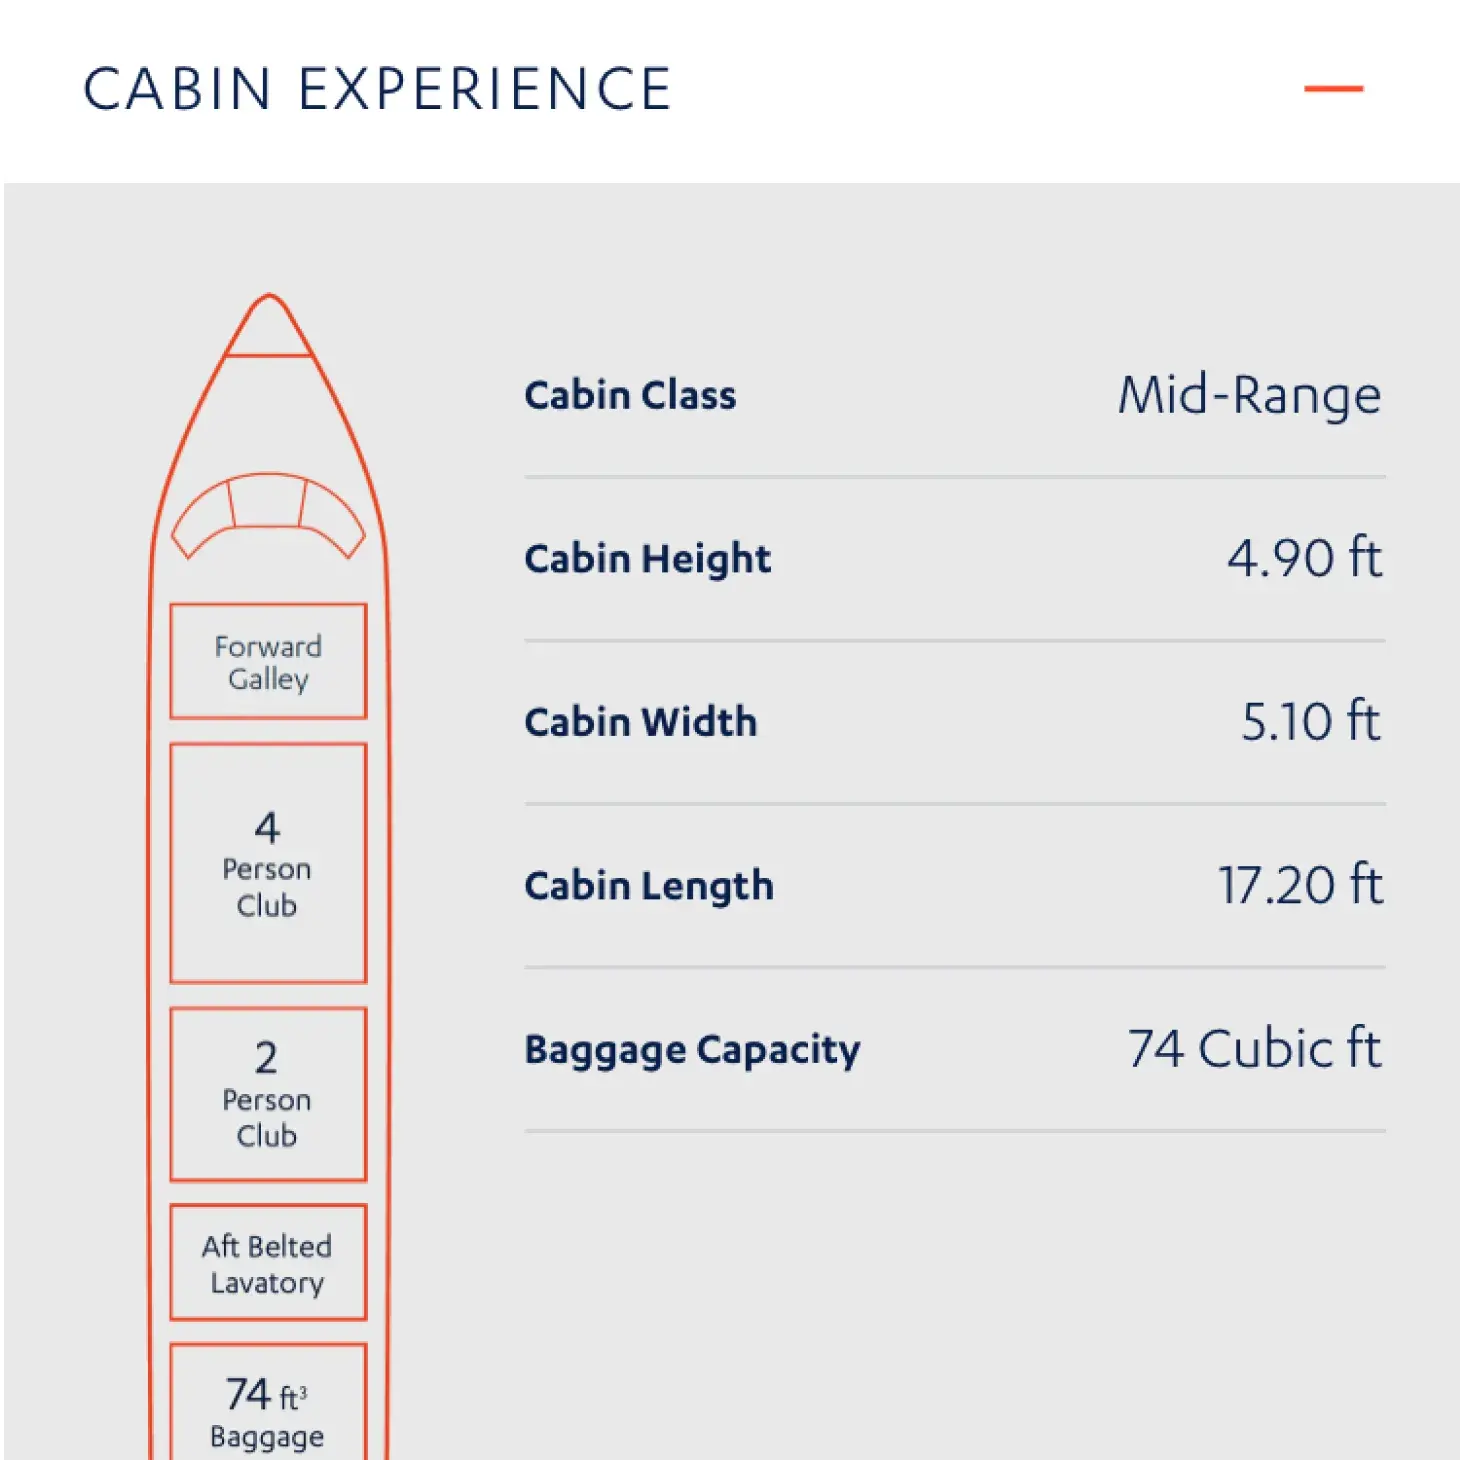 Cabin experience graphic